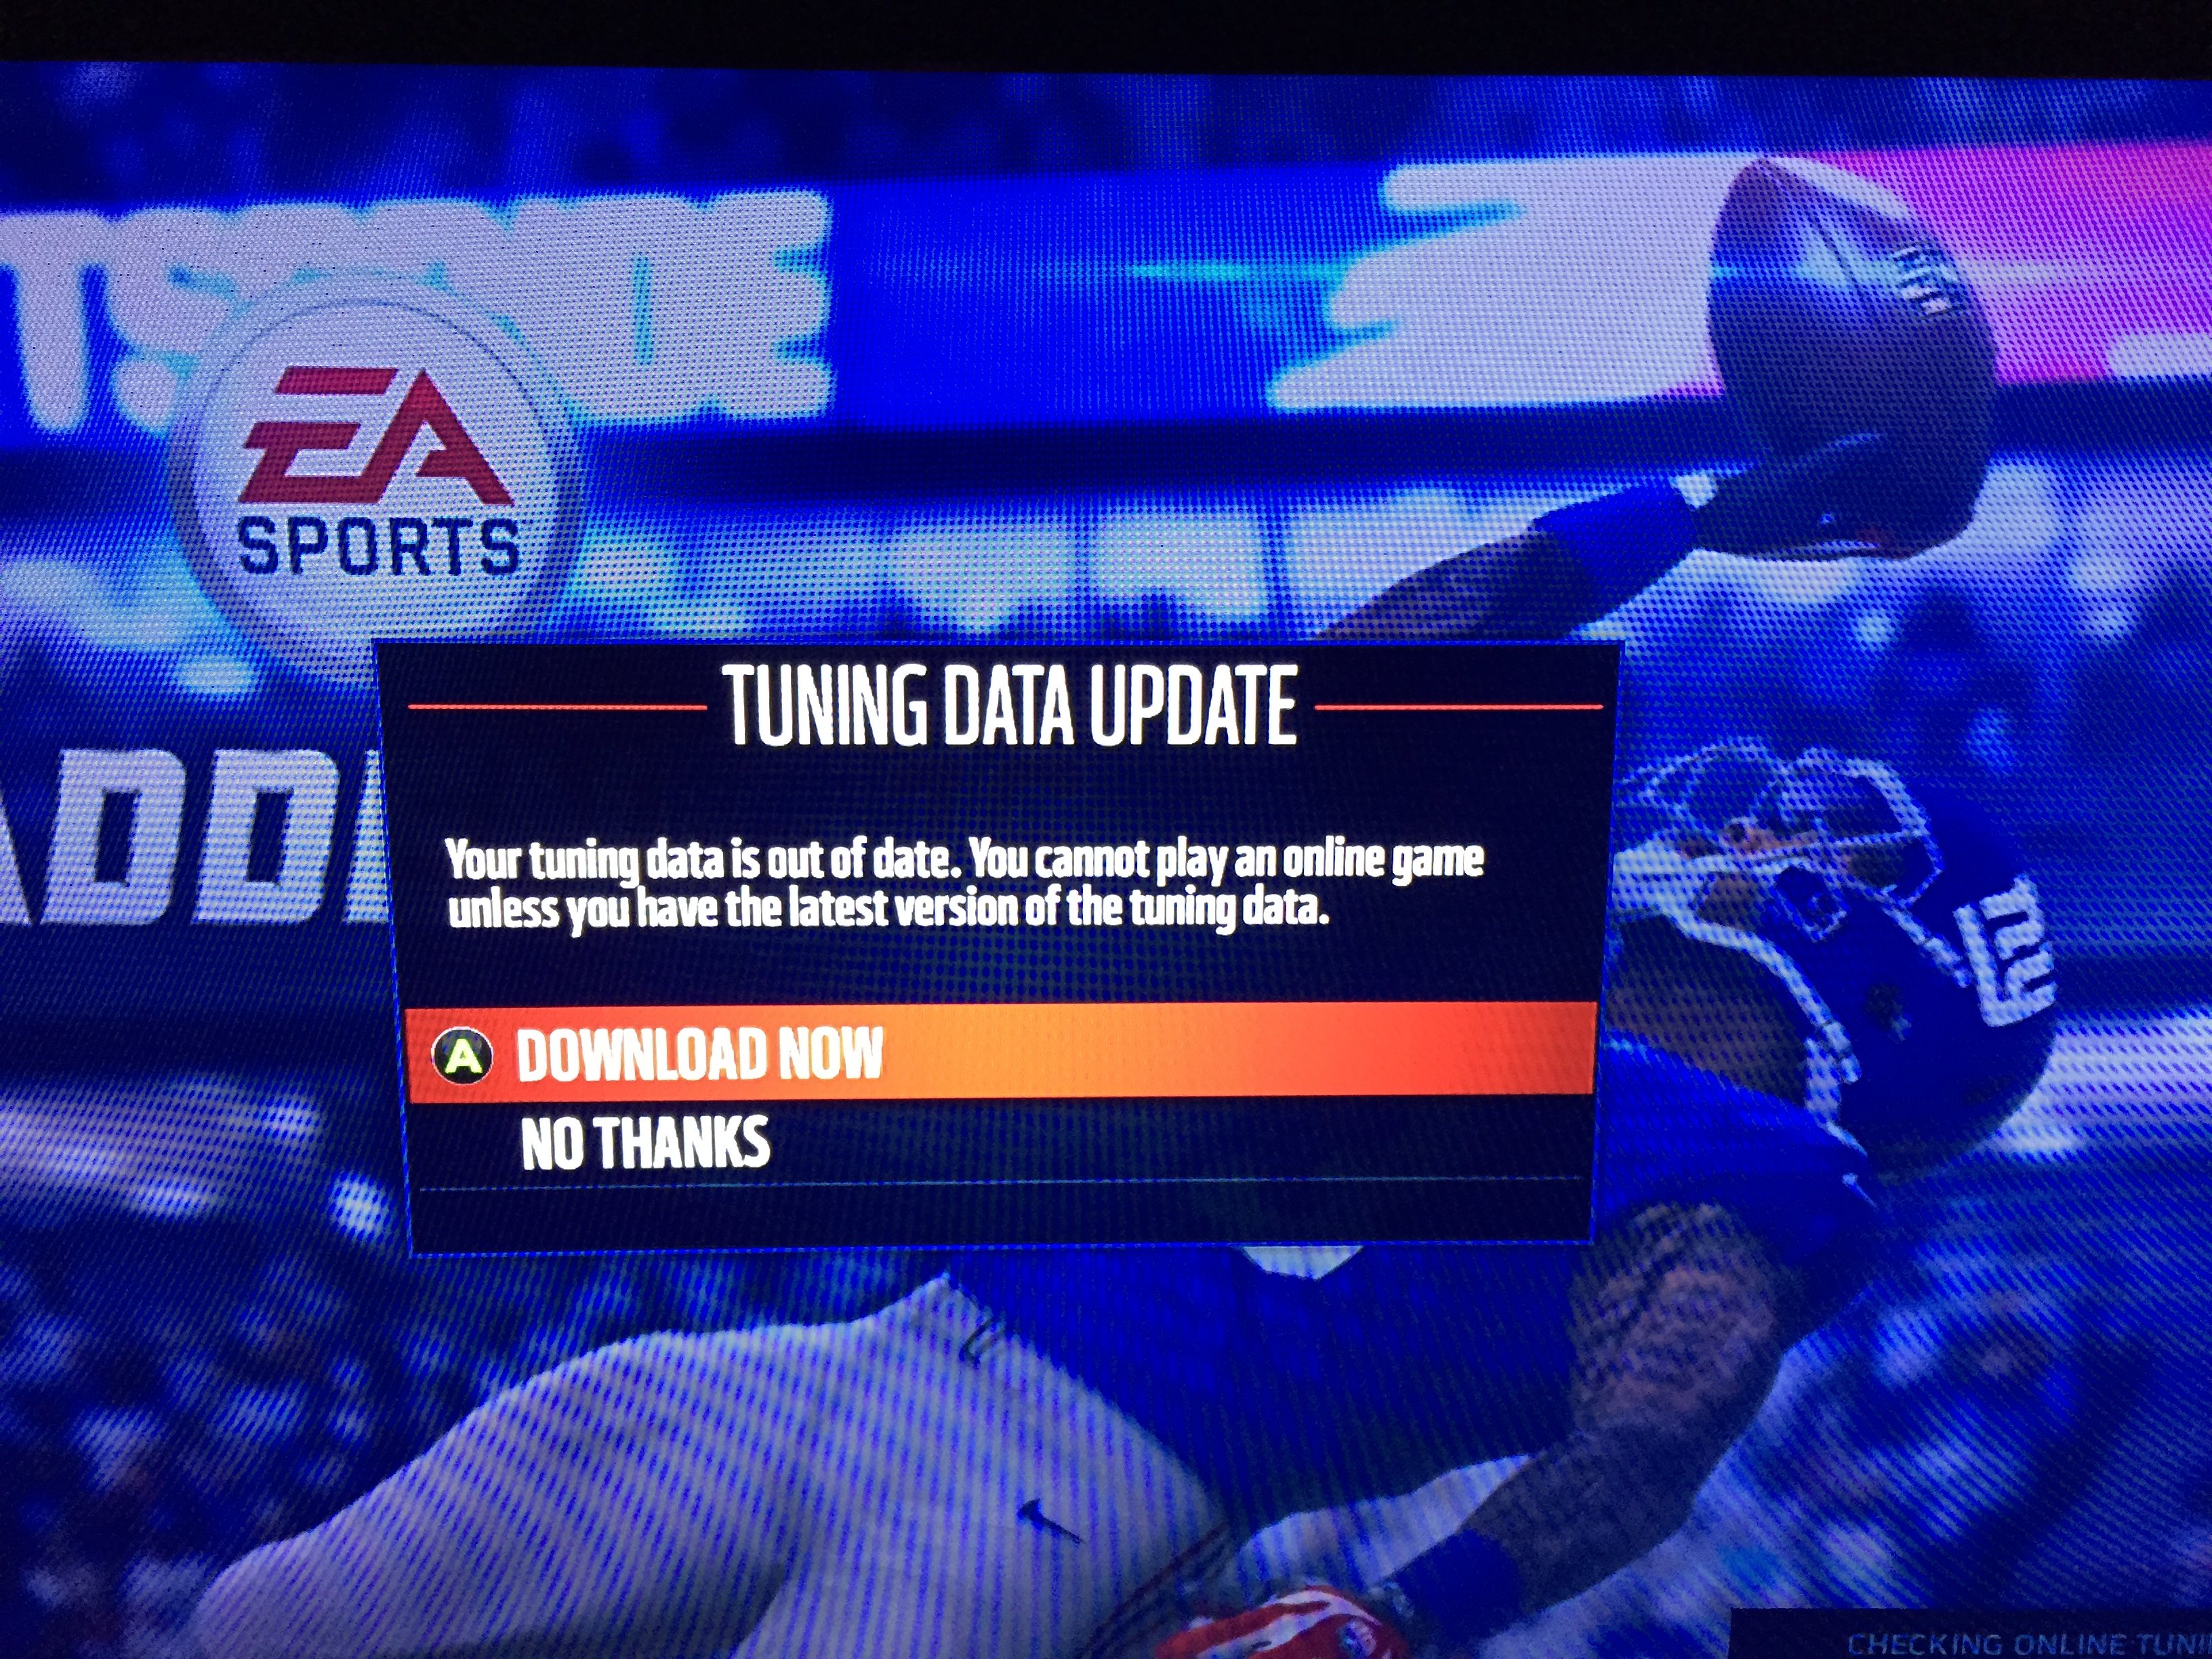 The Madden 16 tuning update arrived, and now a Madden 16 update is here to fix problems.